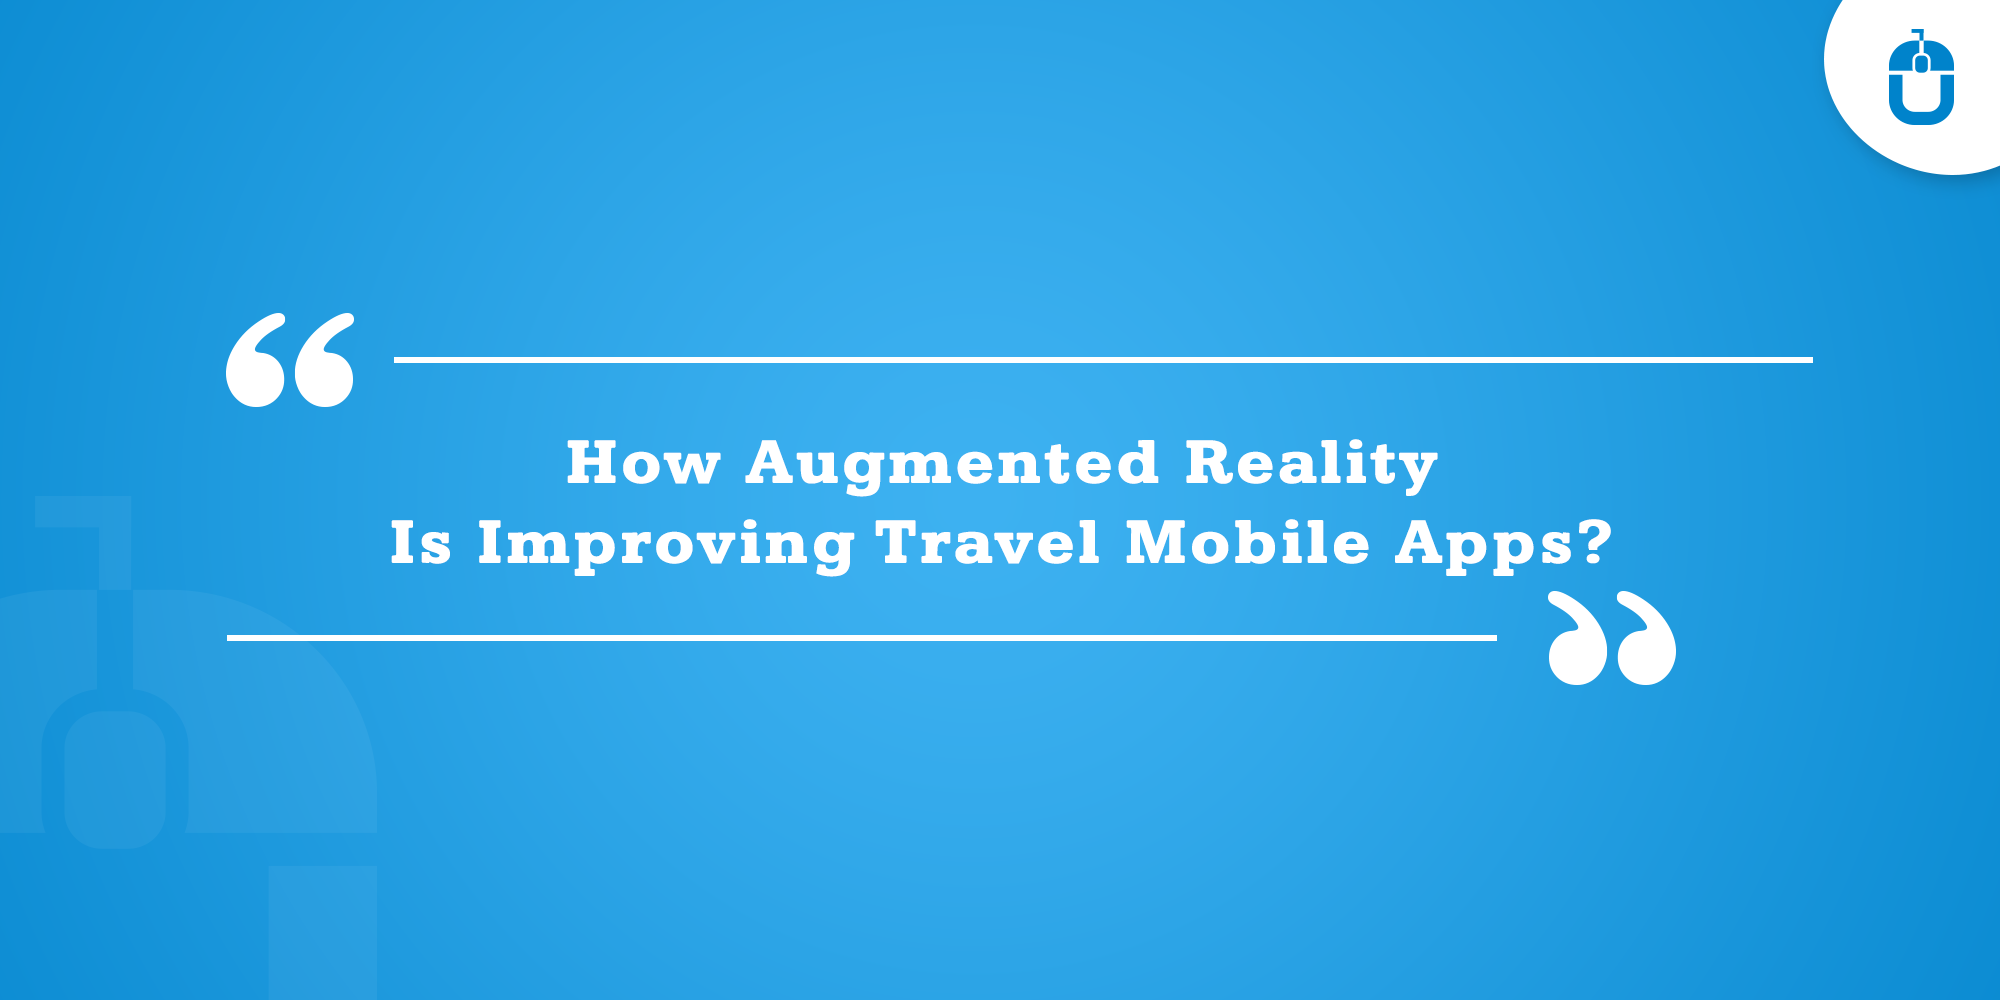 How Augmented Reality Is Improving Travel Mobile Apps?